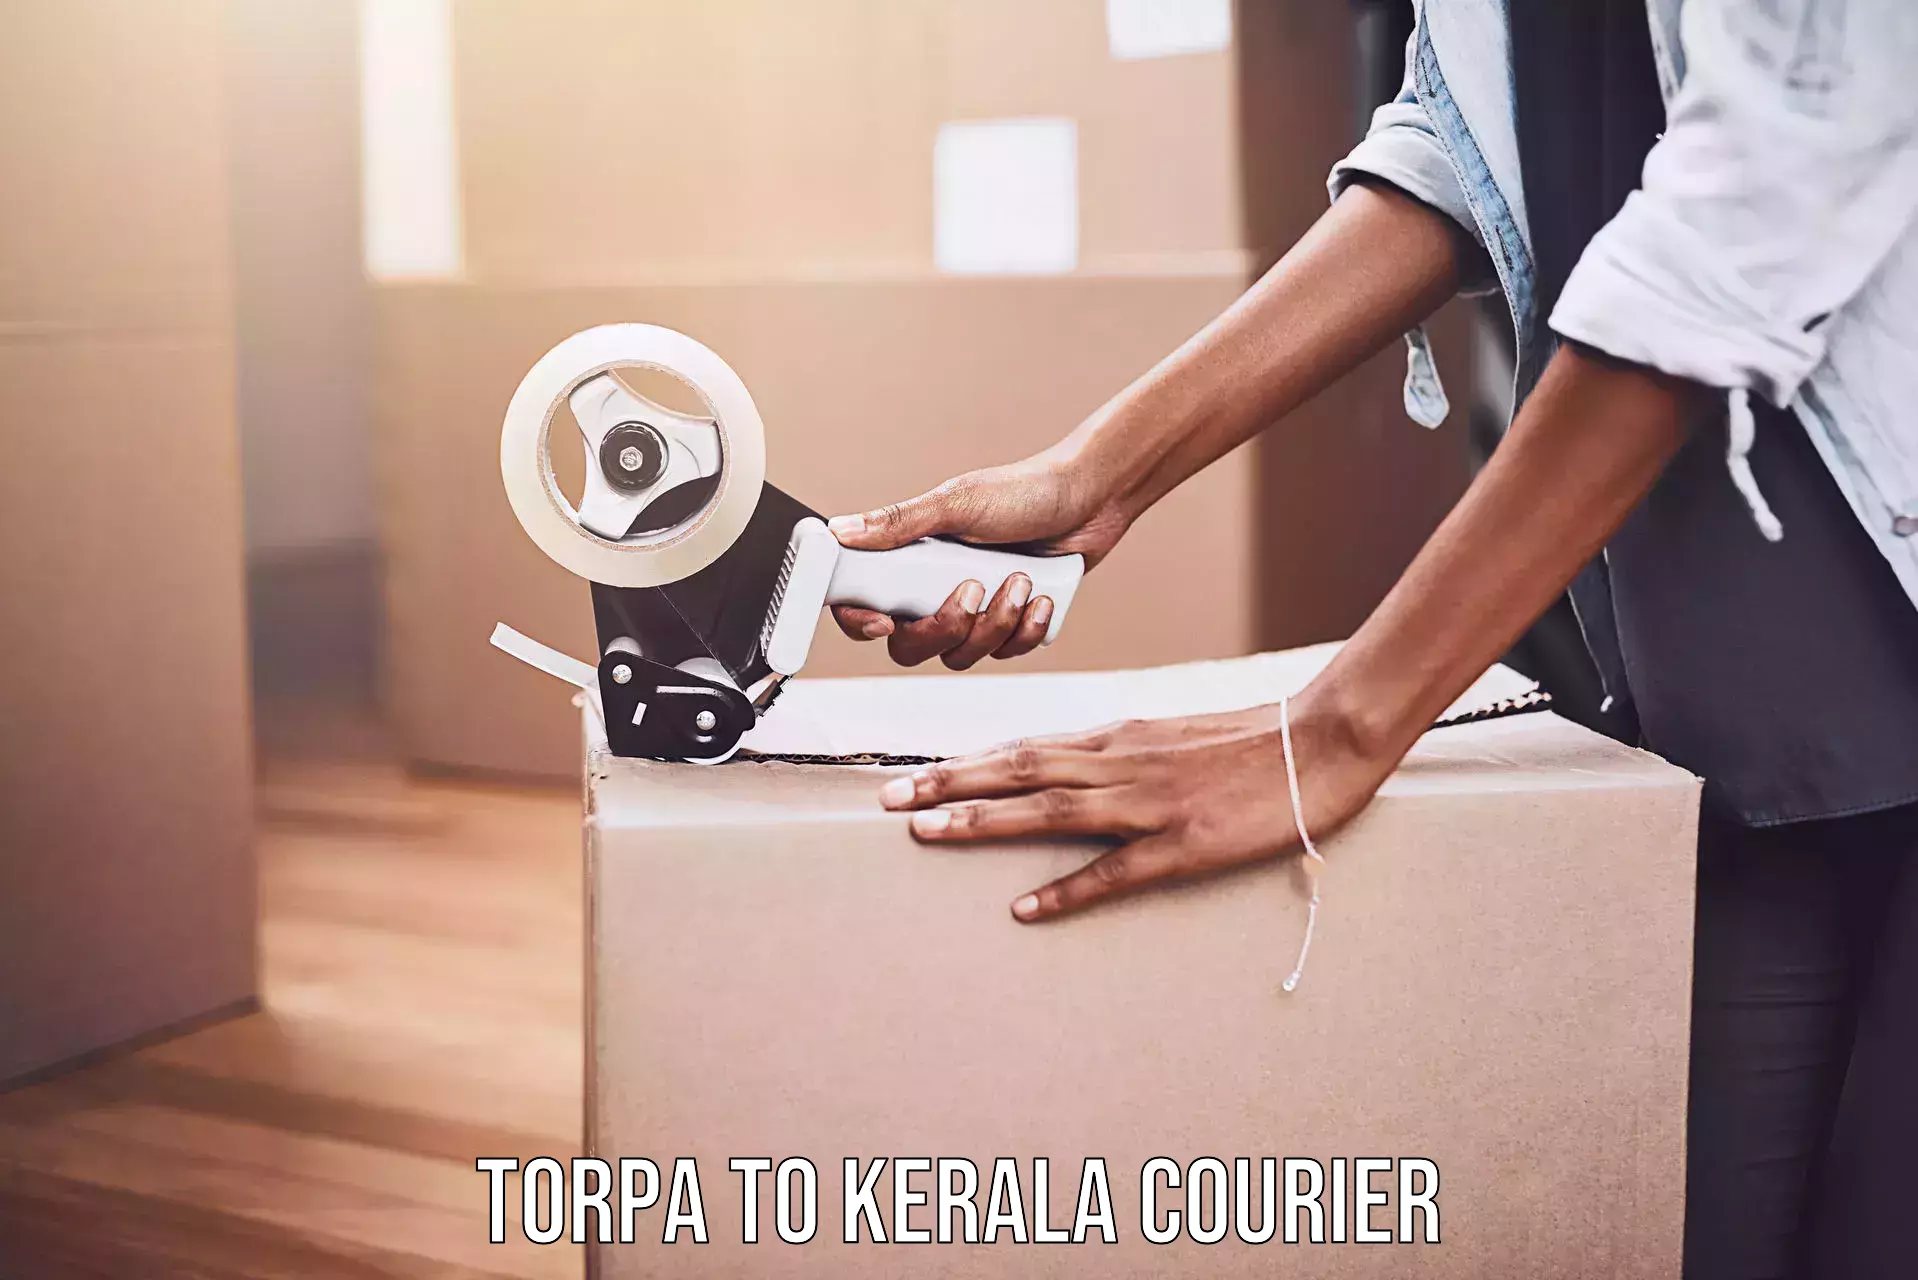 Courier service comparison Torpa to Kerala